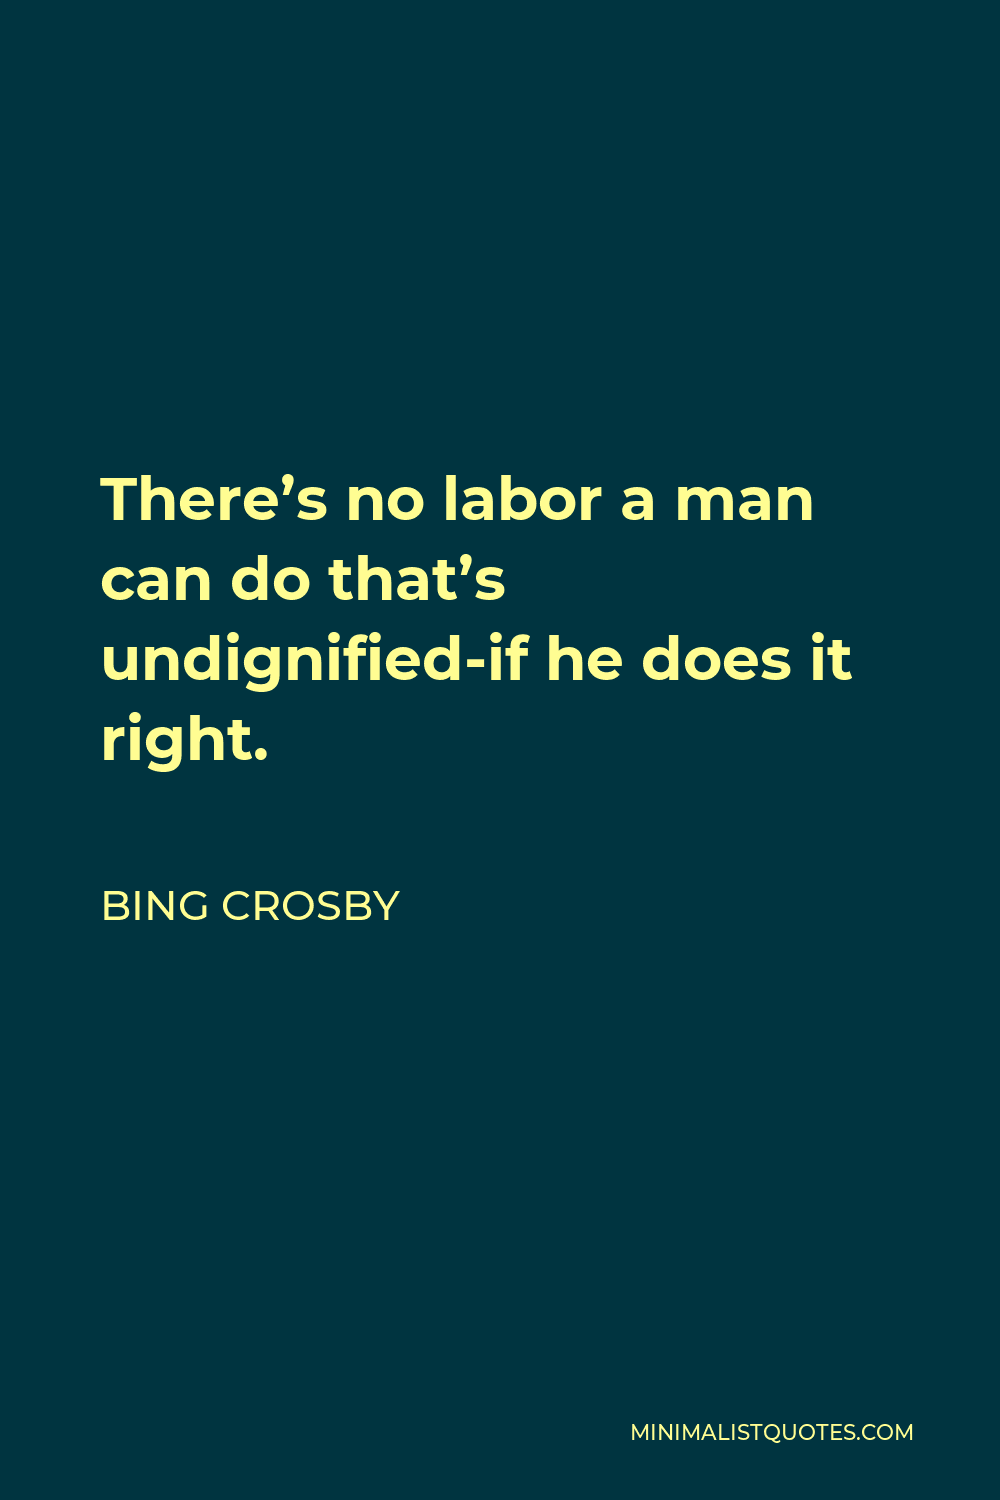 Bing Crosby Quote - There’s no labor a man can do that’s undignified-if he does it right.